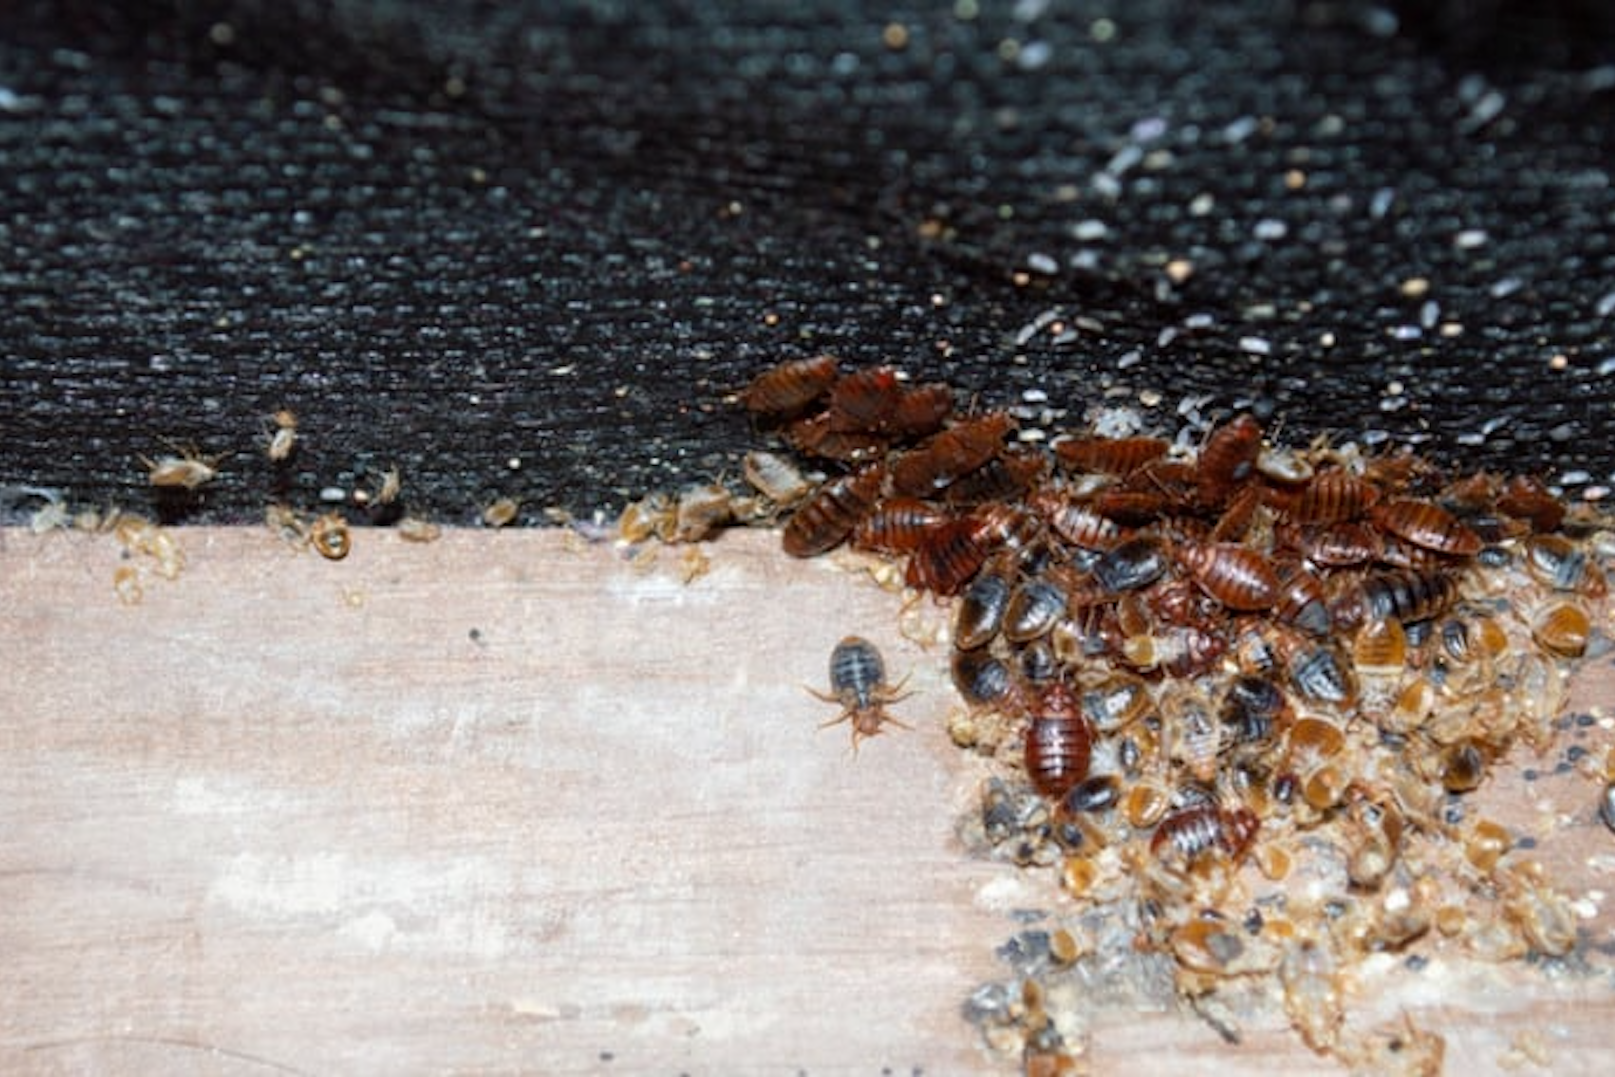 Bed bugs are more common than you might think